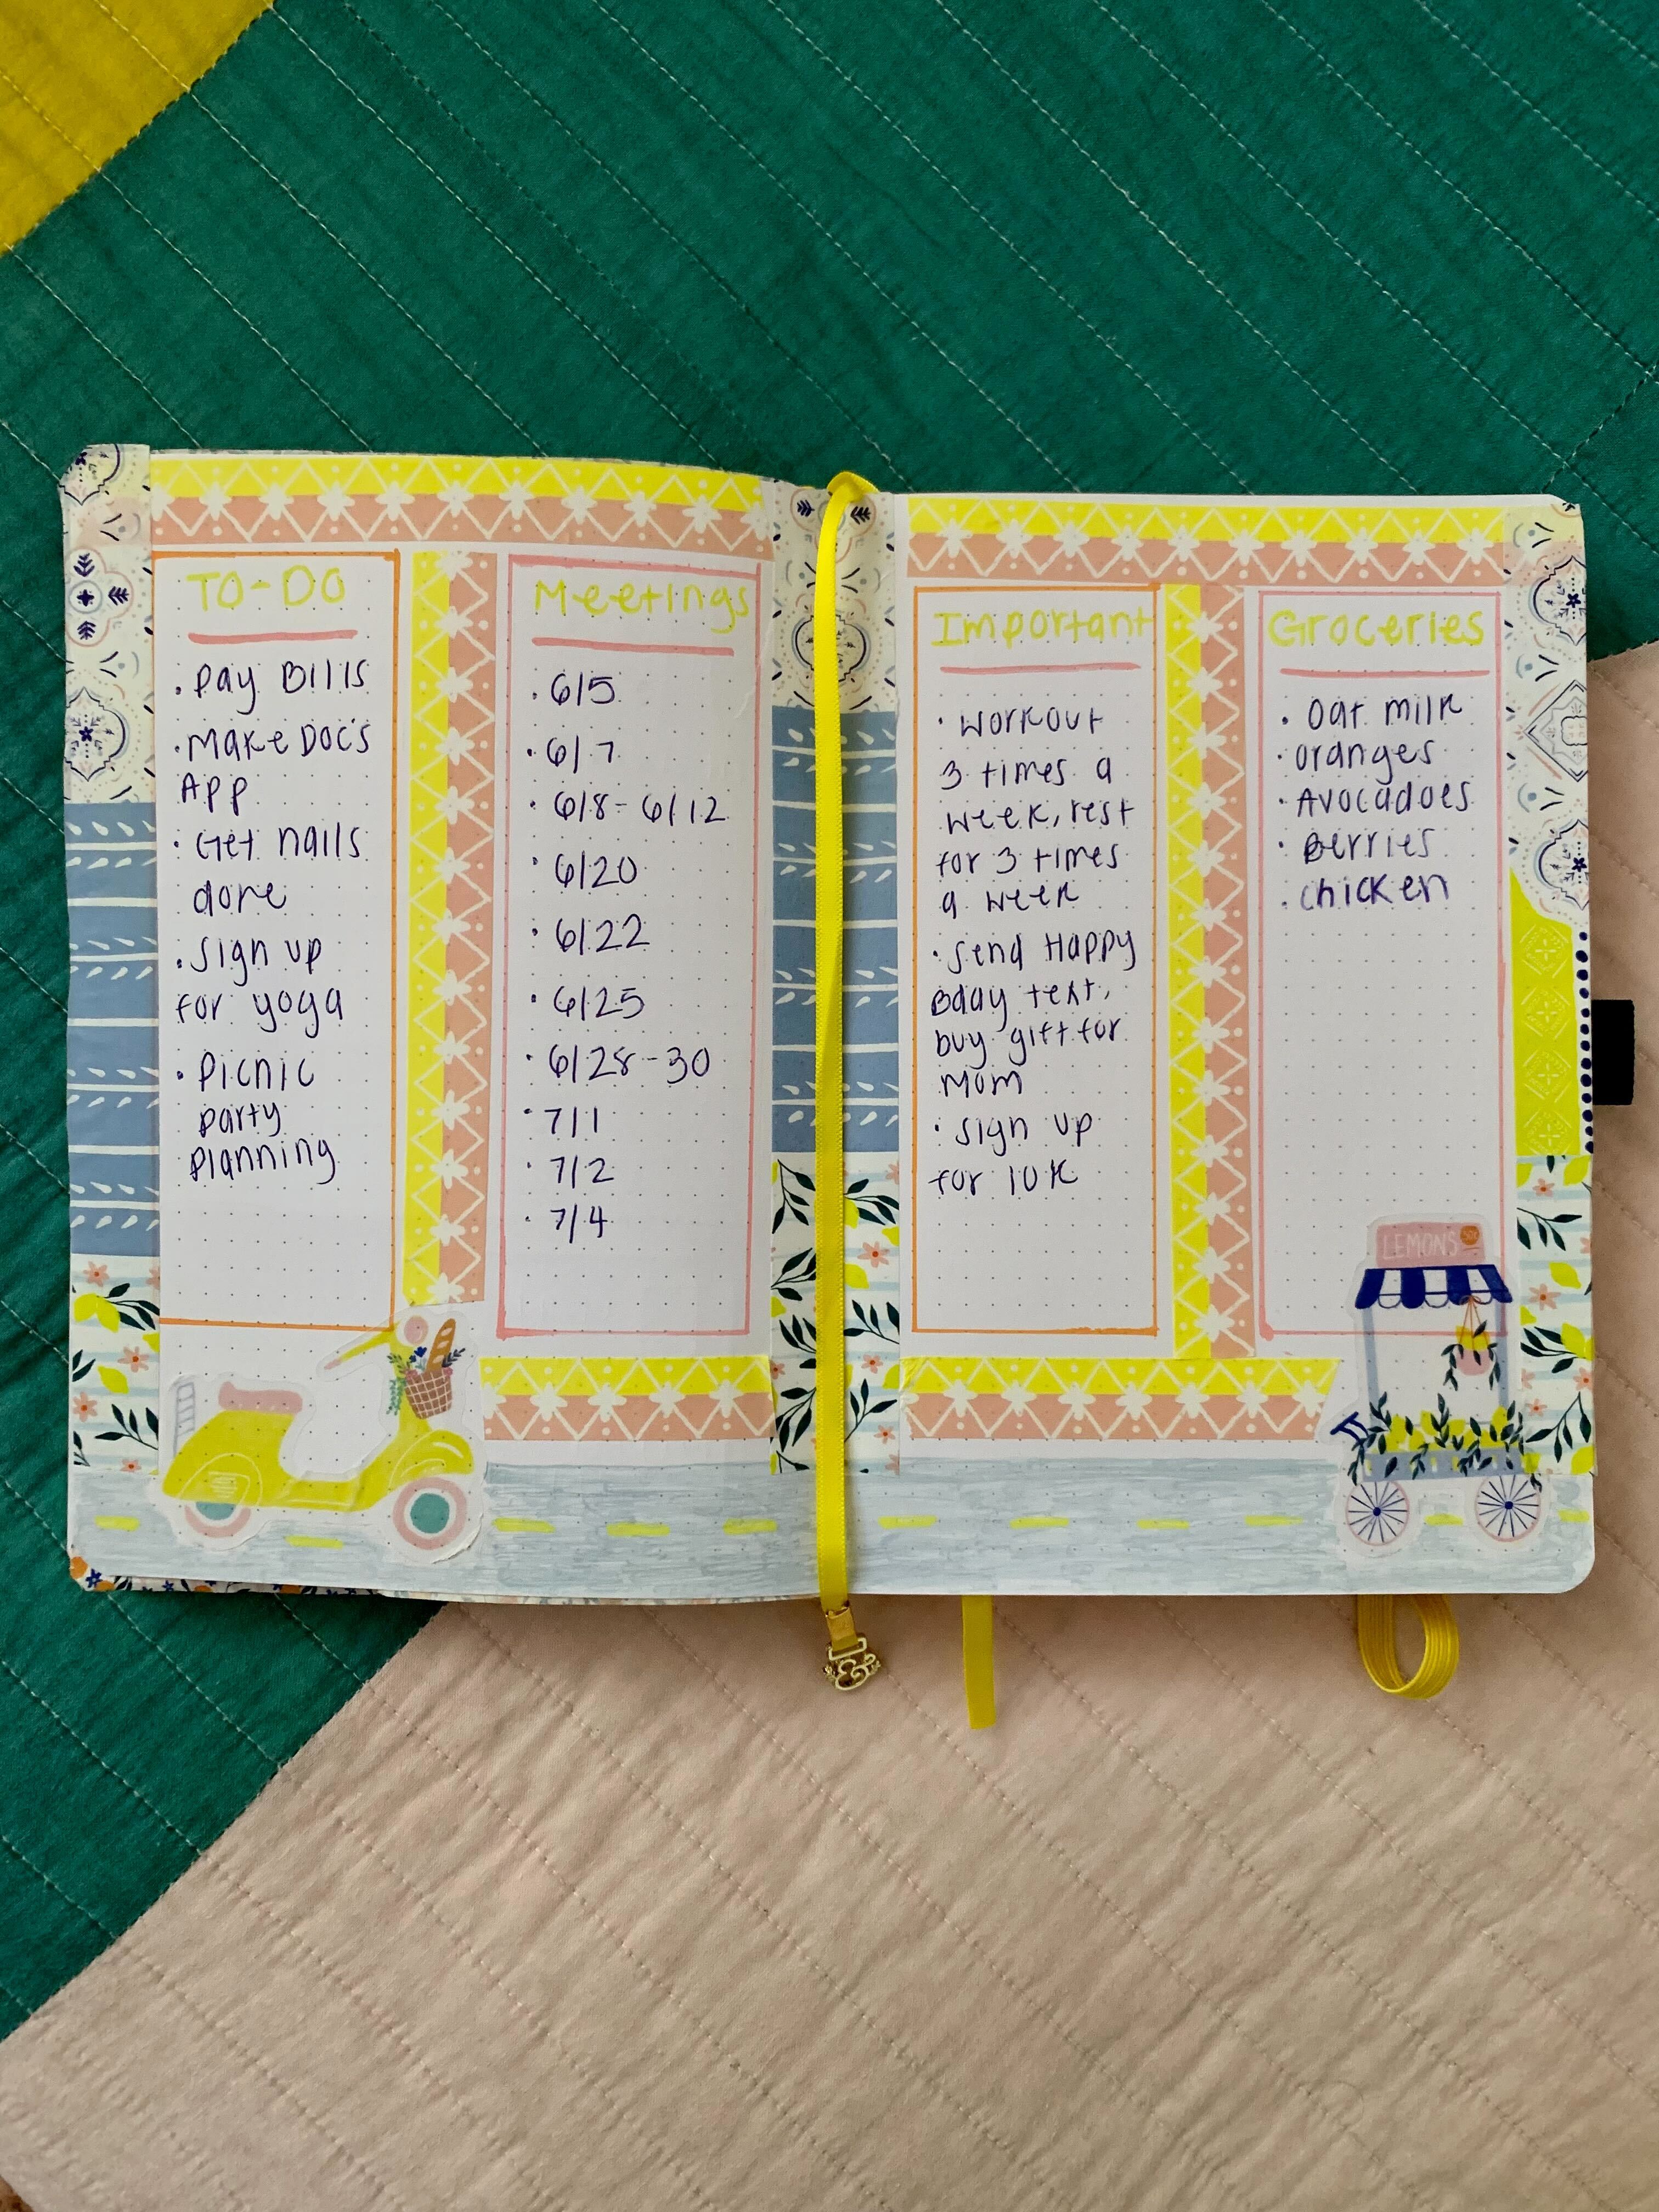 pages of the yellow vespa notebook that feature a to-do list, grocery list, meetings, and important dates